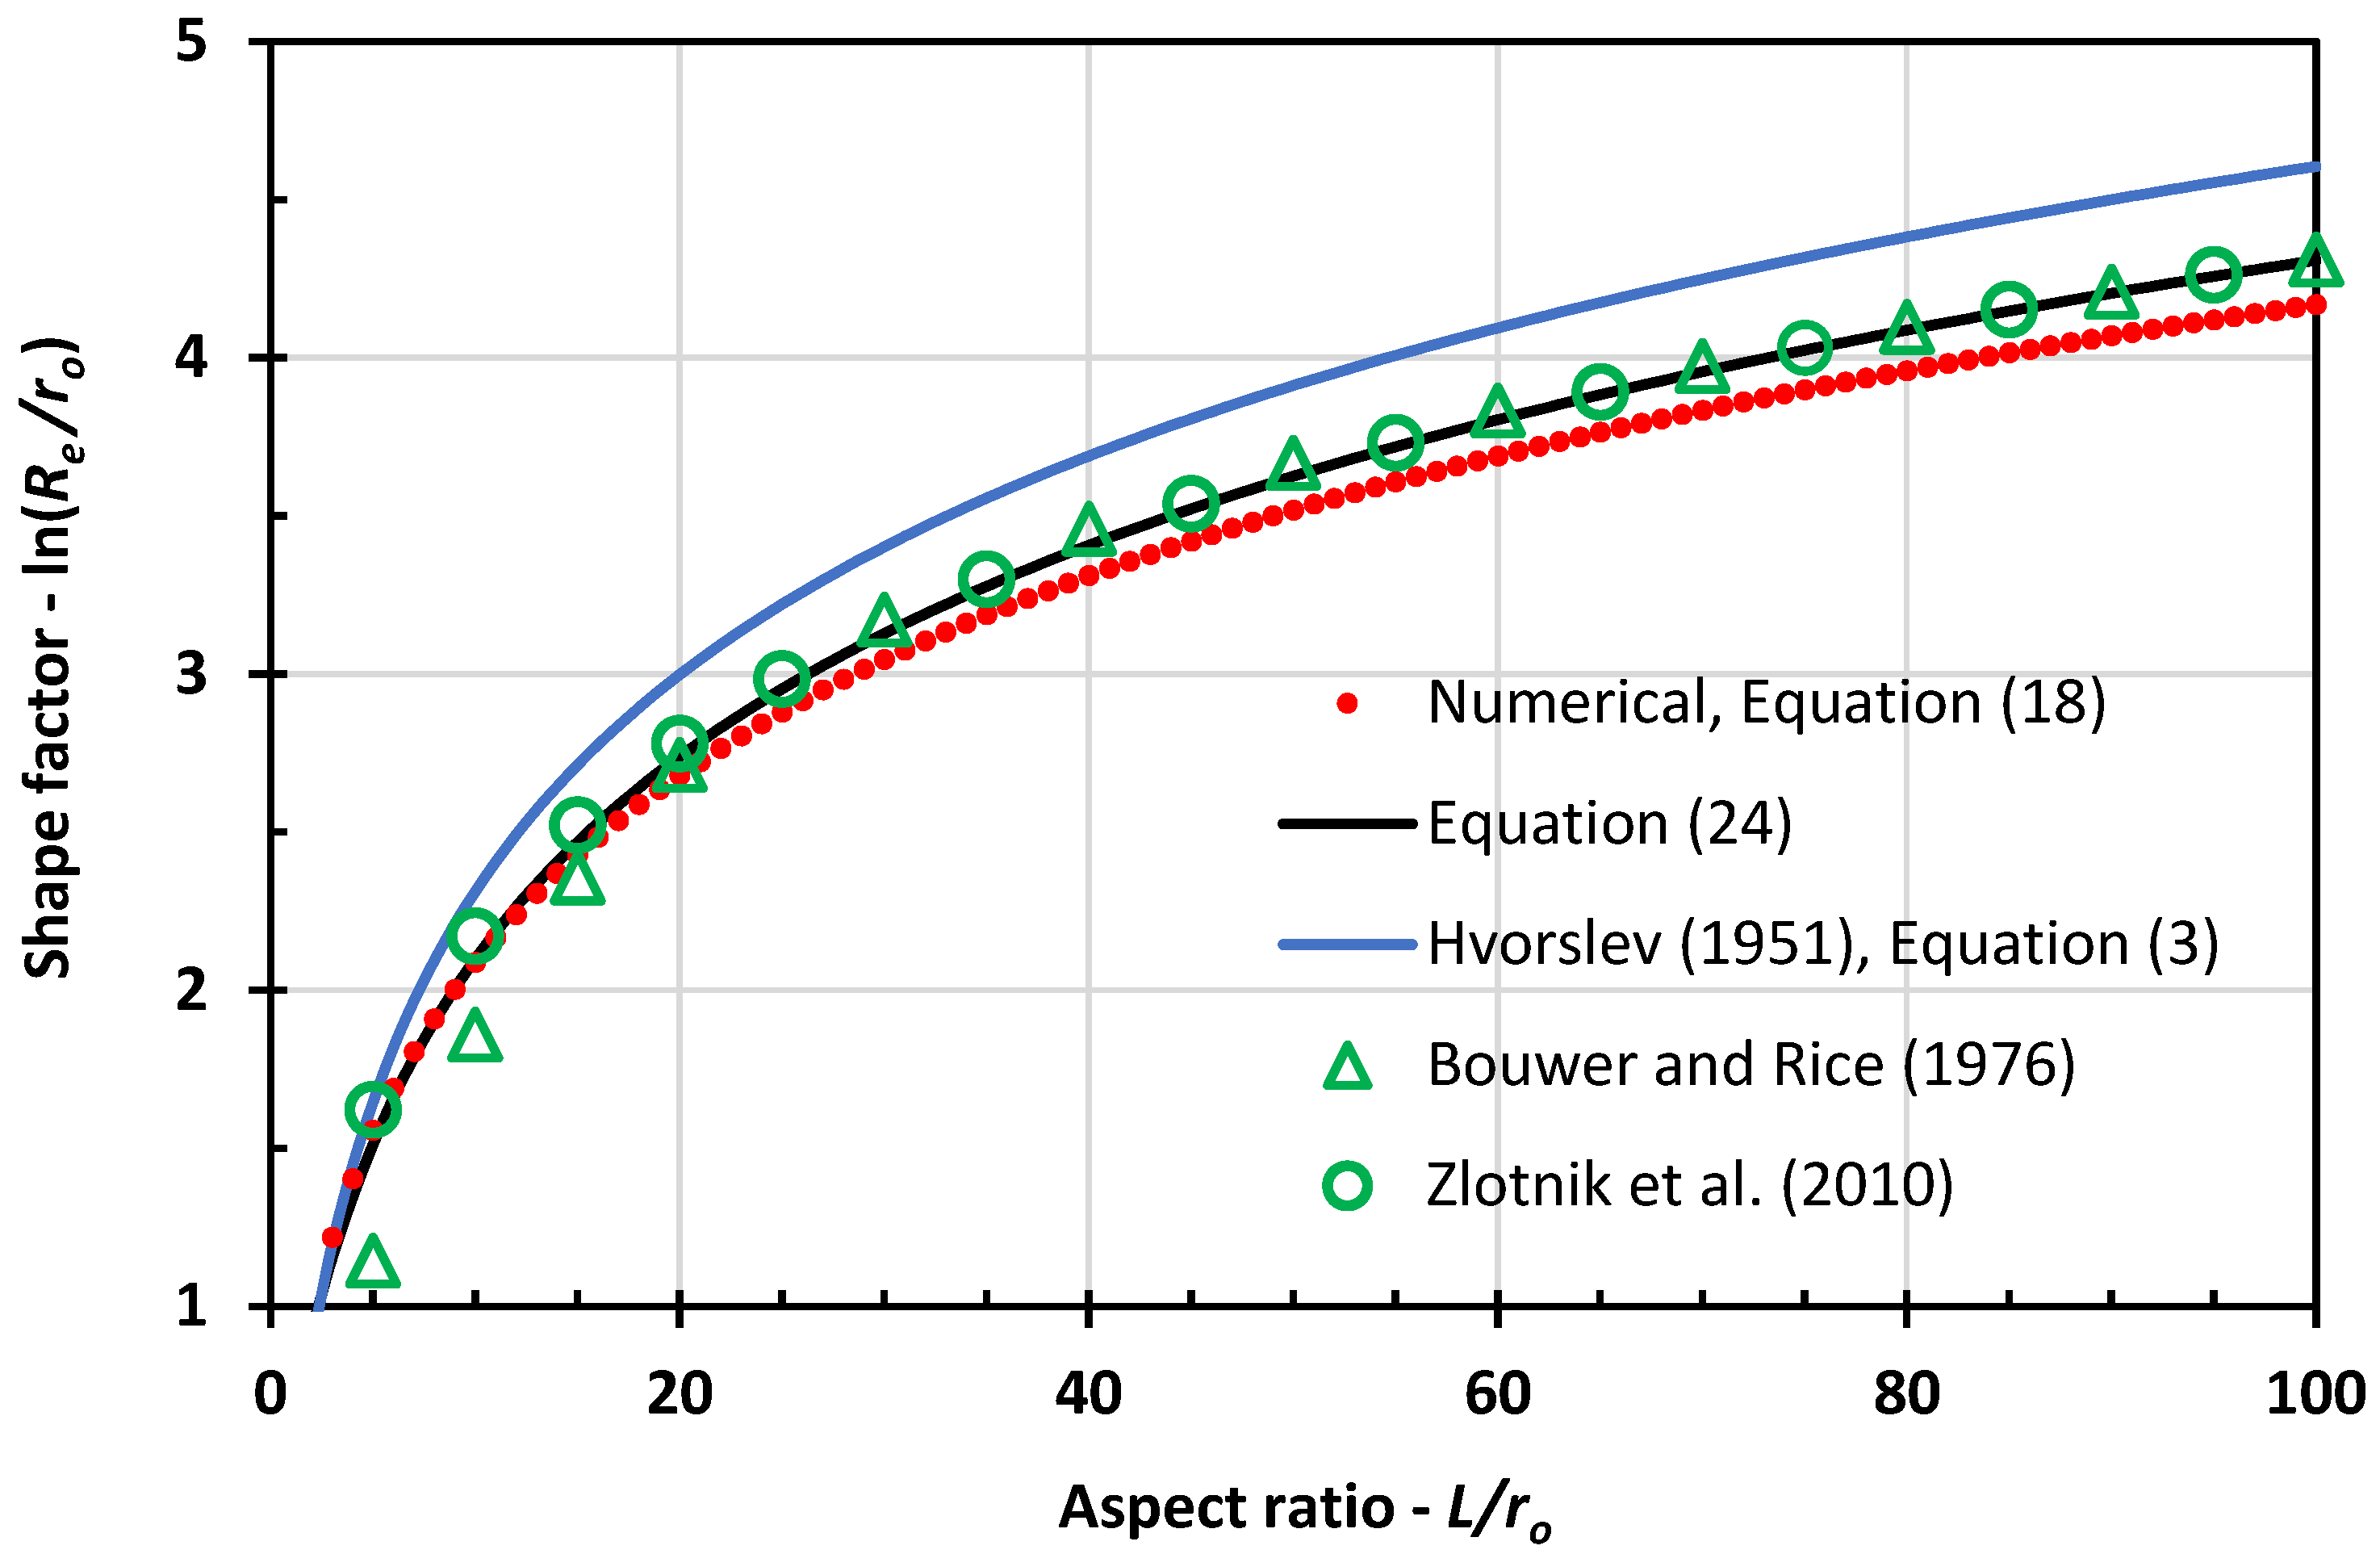 https://www.mdpi.com/water/water-15-02551/article_deploy/html/images/water-15-02551-g002.png